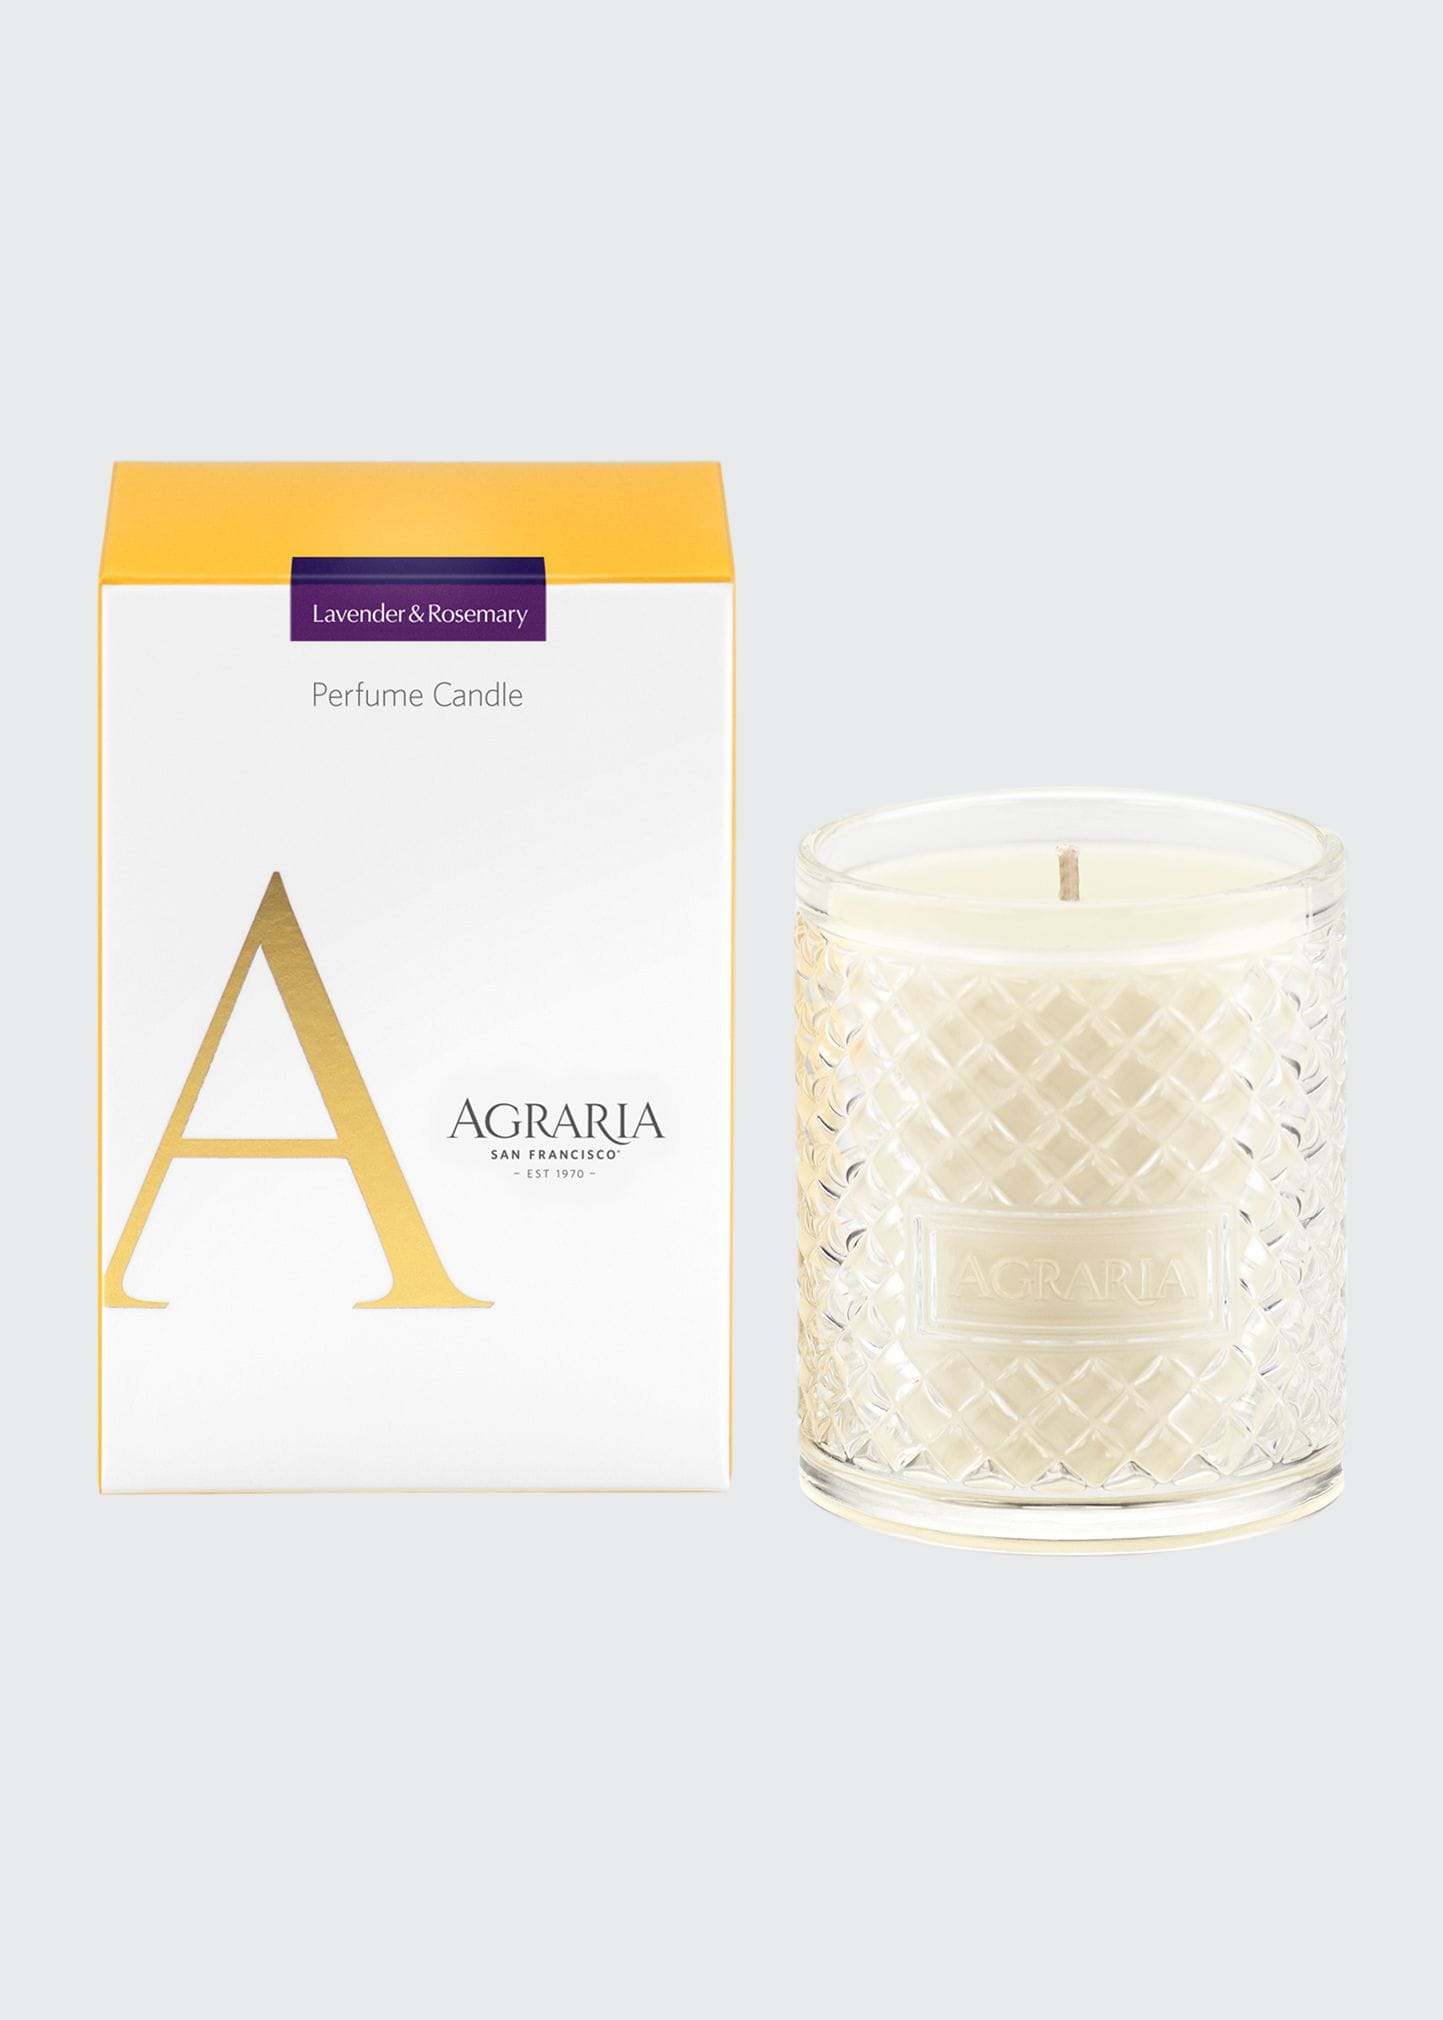 Agraria Lavender & Rosemary Perfume Candle, 7 oz.